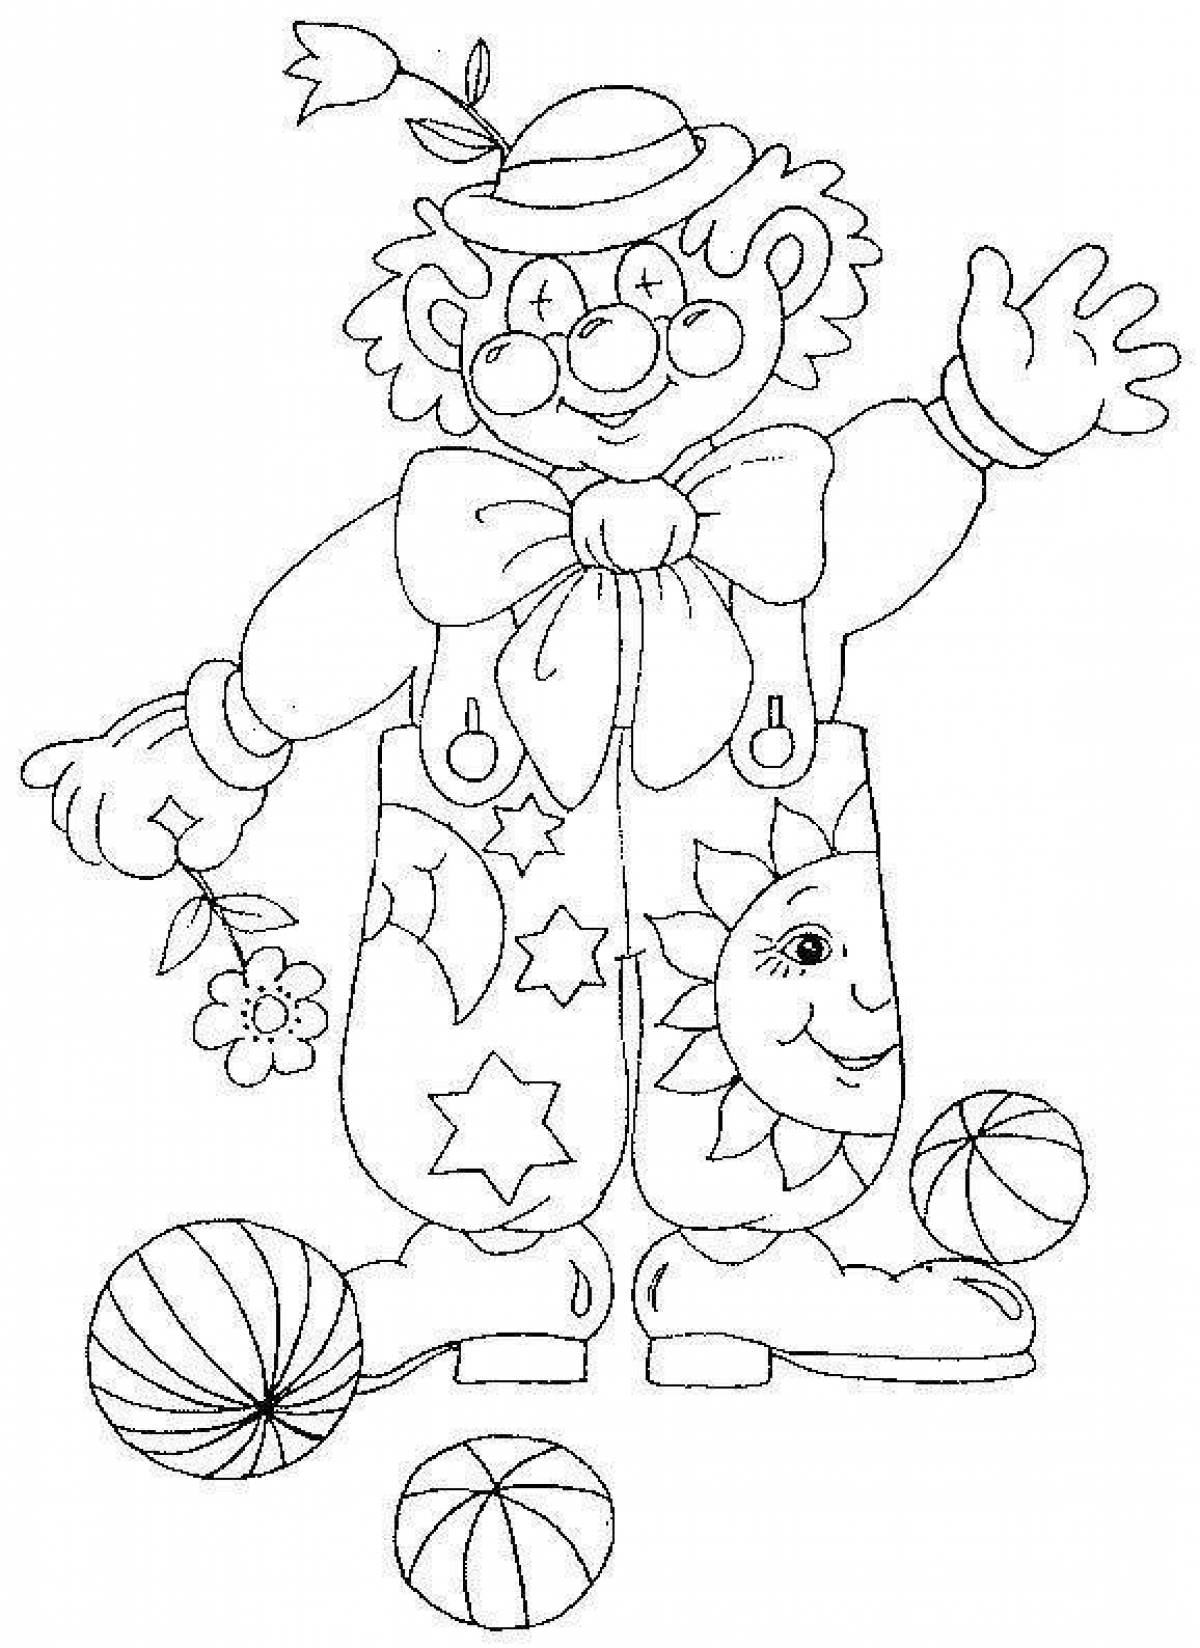 Outrageous clown coloring book for kids